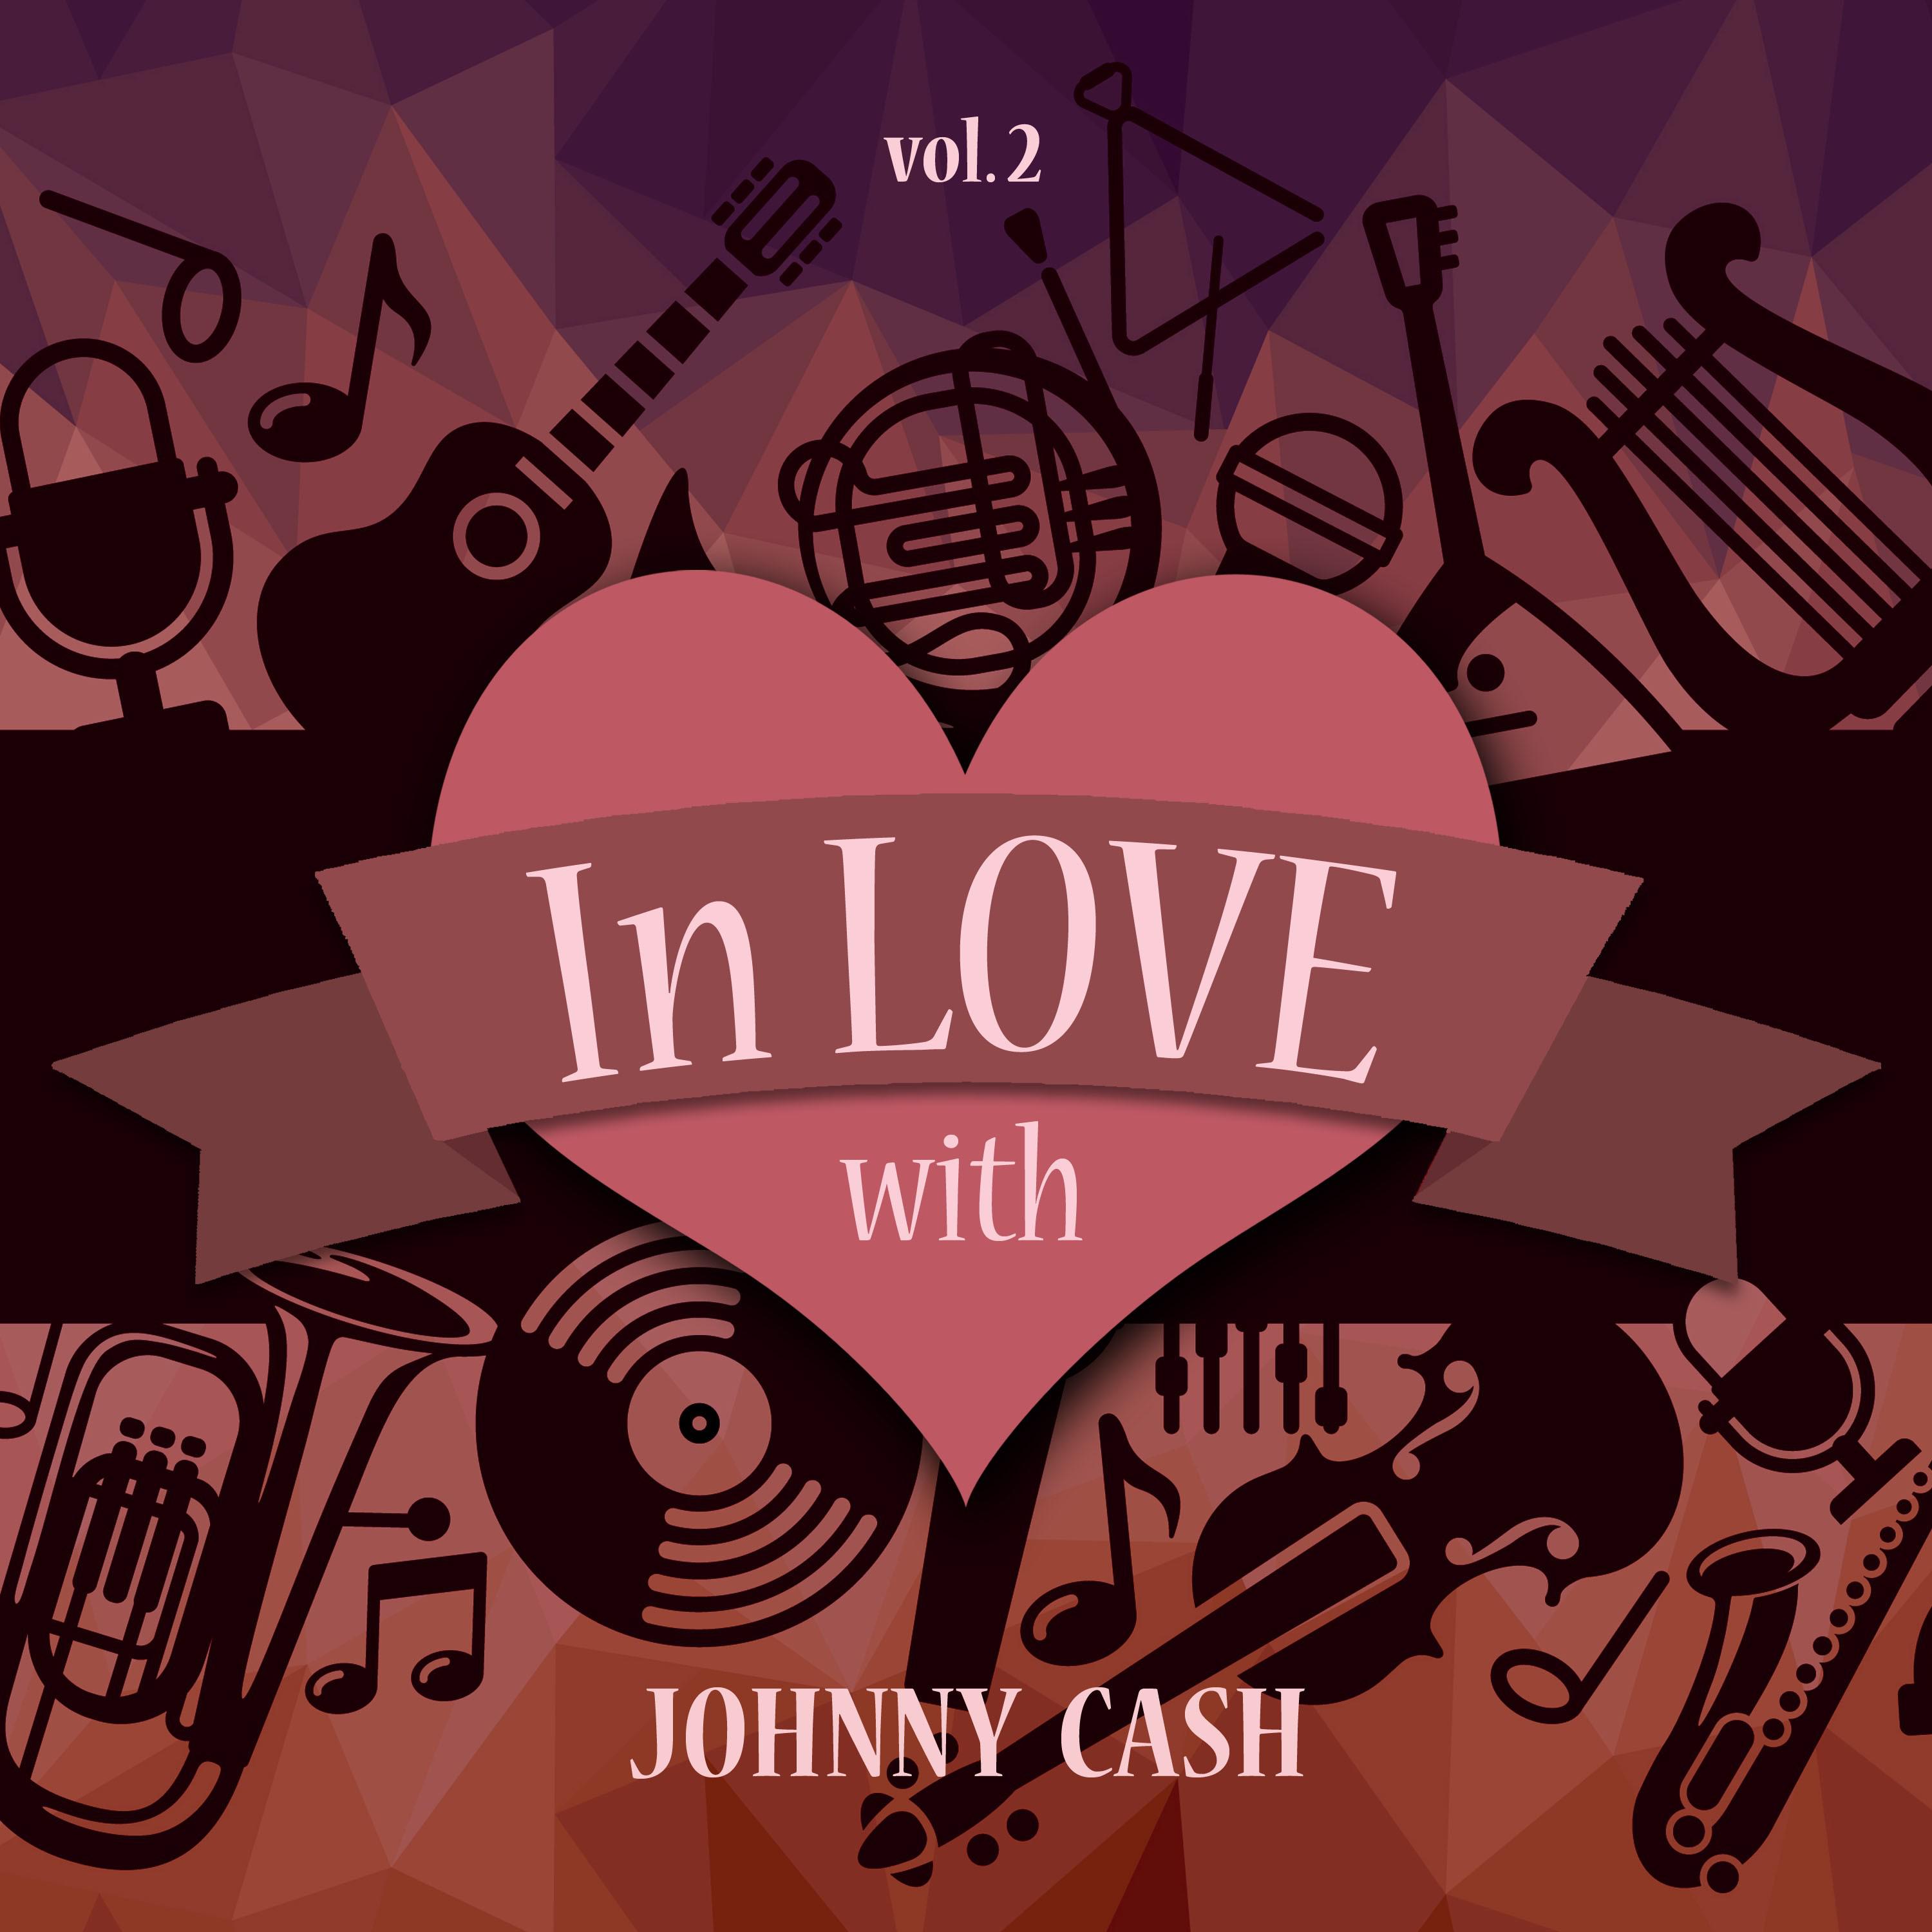 In Love with Johnny Cash, Vol. 2